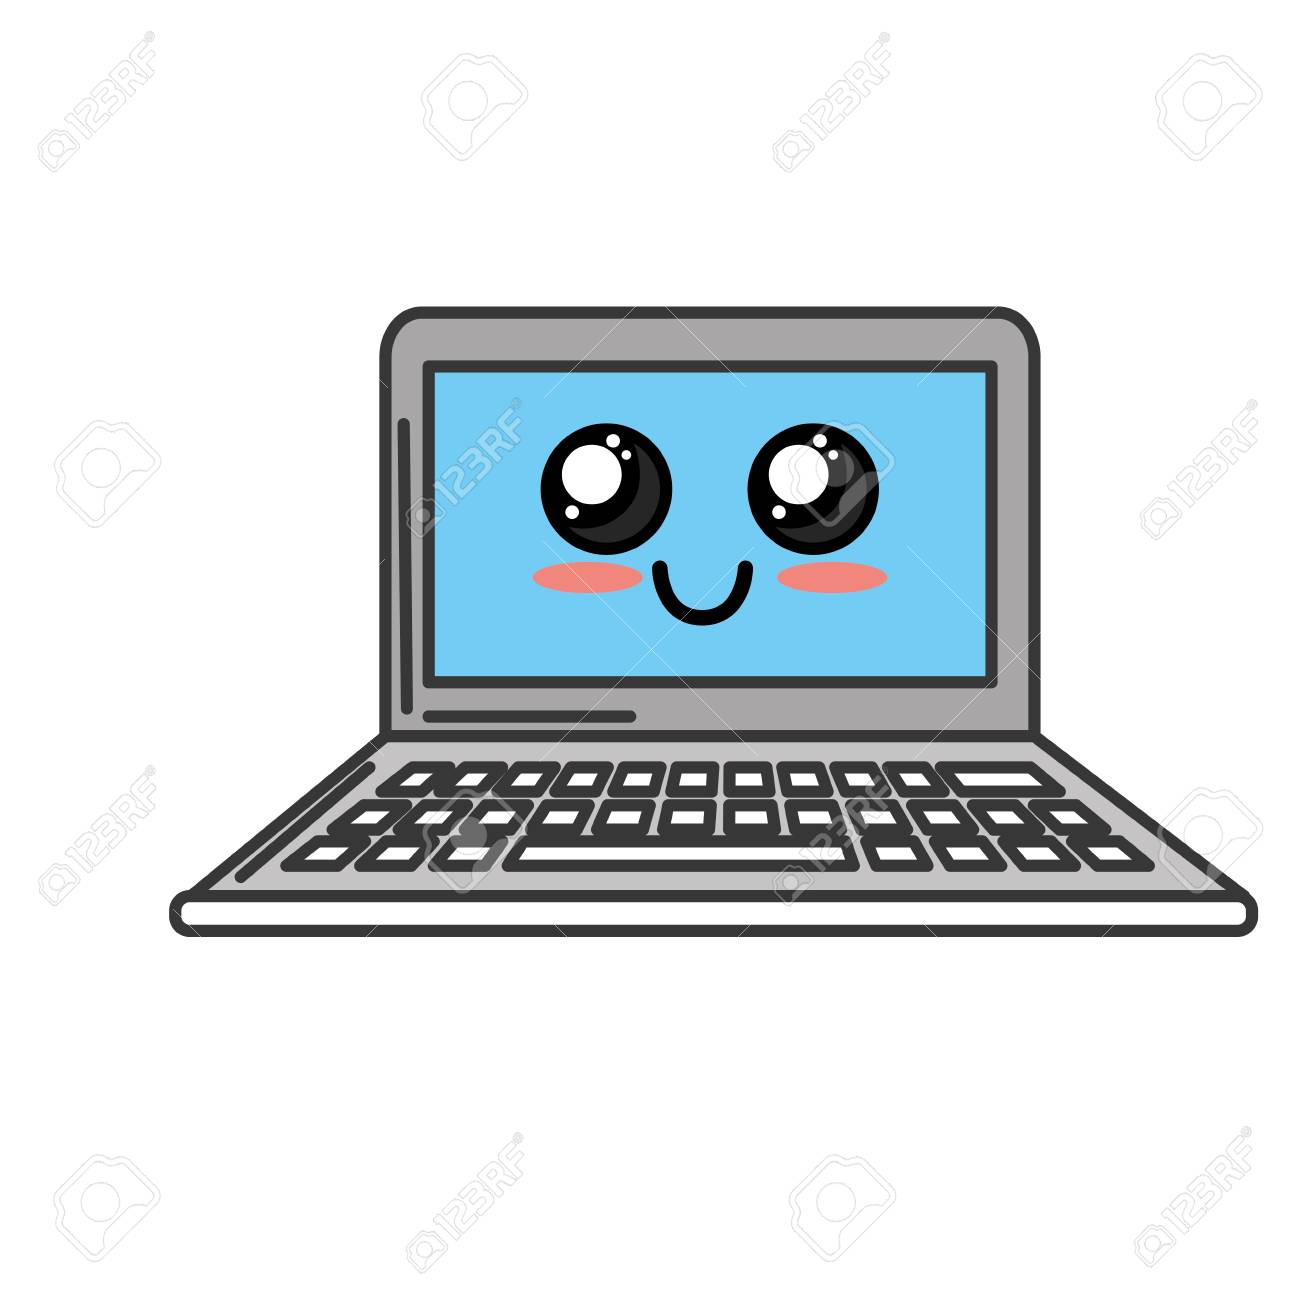 Computer clipart cute, Computer cute Transparent FREE for download on ...